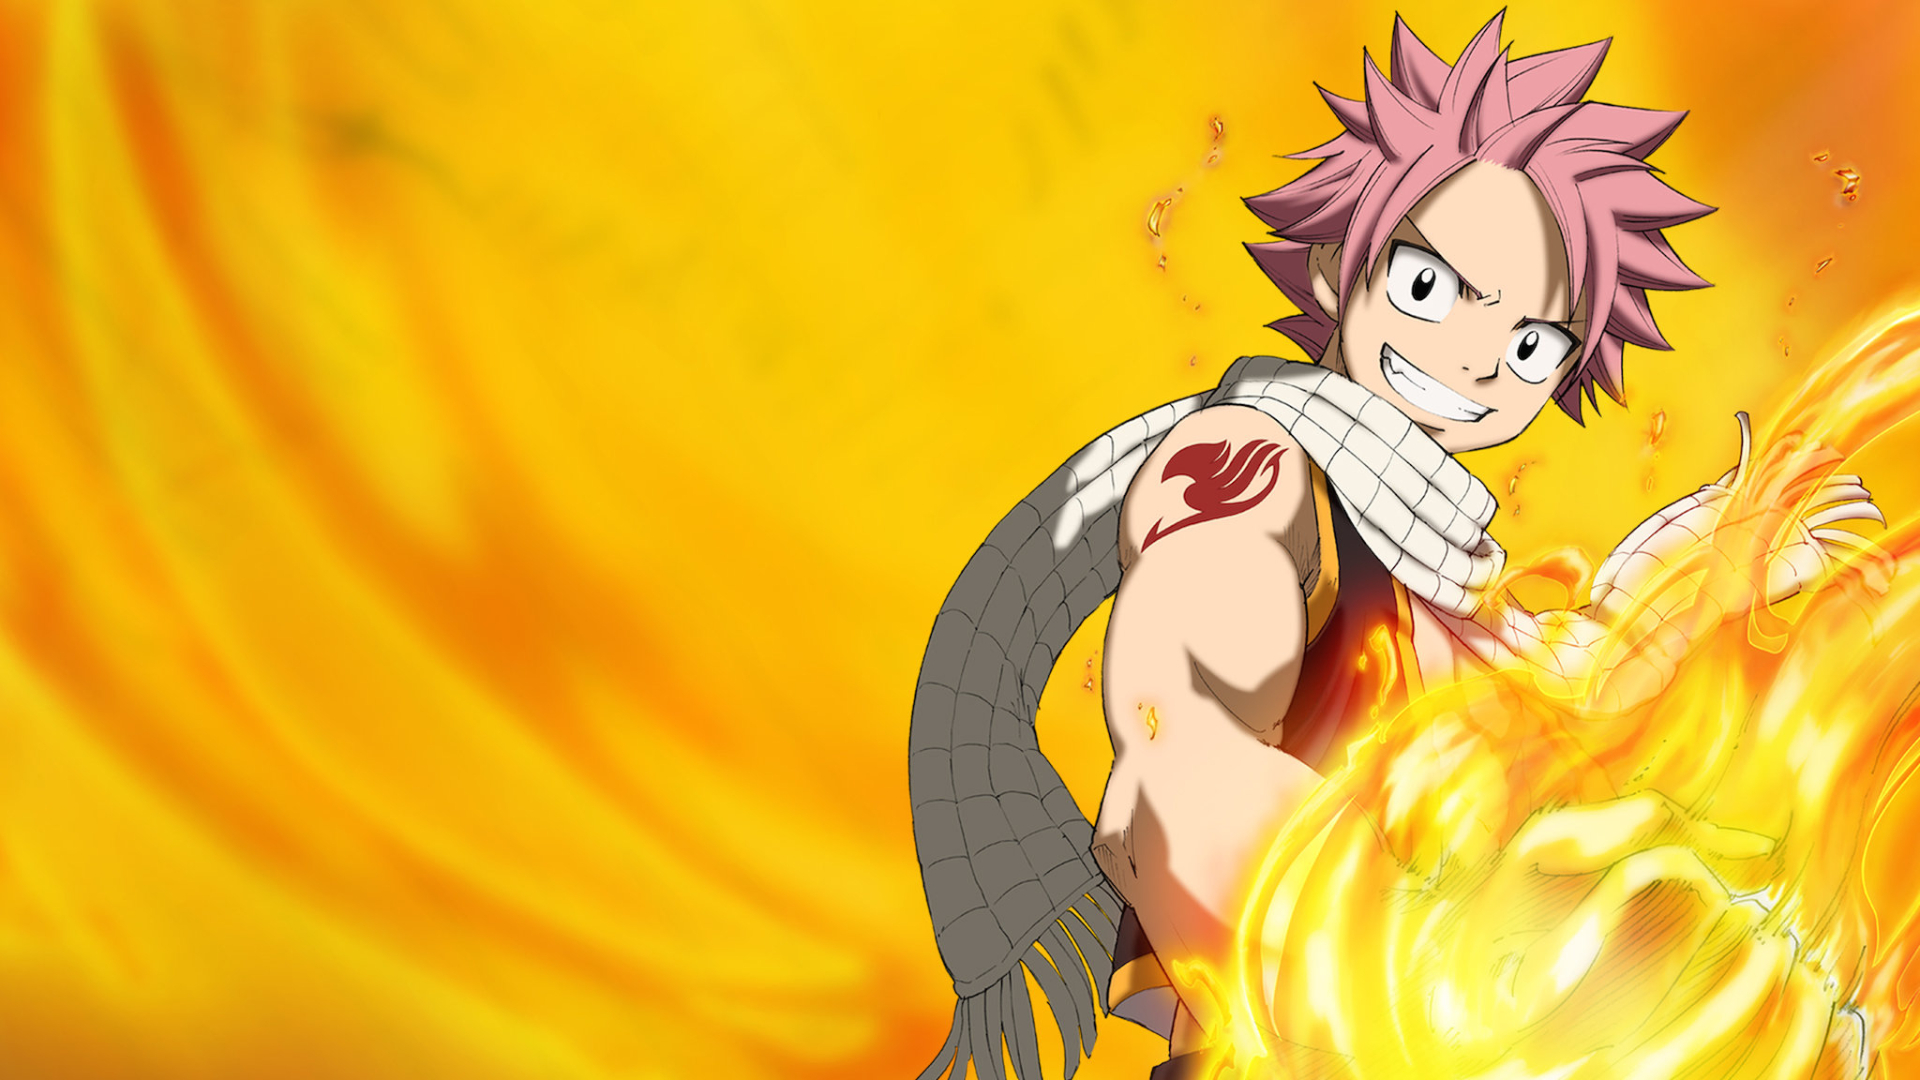 1920x1080 fairy tail logo wallpaper (67+ images)>. 1920x1080 Fairy Tail 2019 1080p Laptop Full Hd Wallpaper Hd Anime 4k Wallpapers Images Photos And Background Wallpapers Den